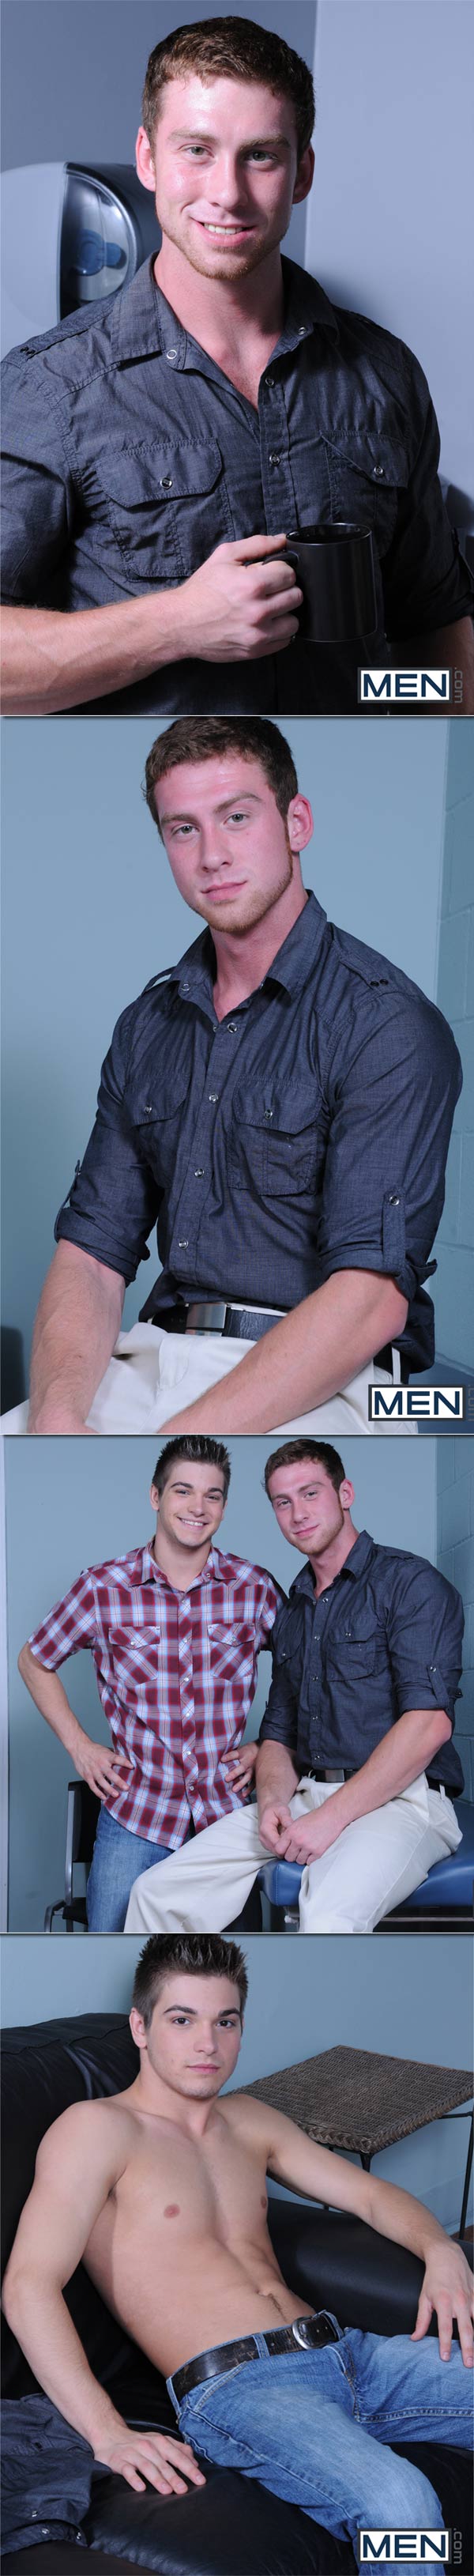 Cheating Loophole (Connor Maguire & Johnny Rapid) at Str8ToGay.com